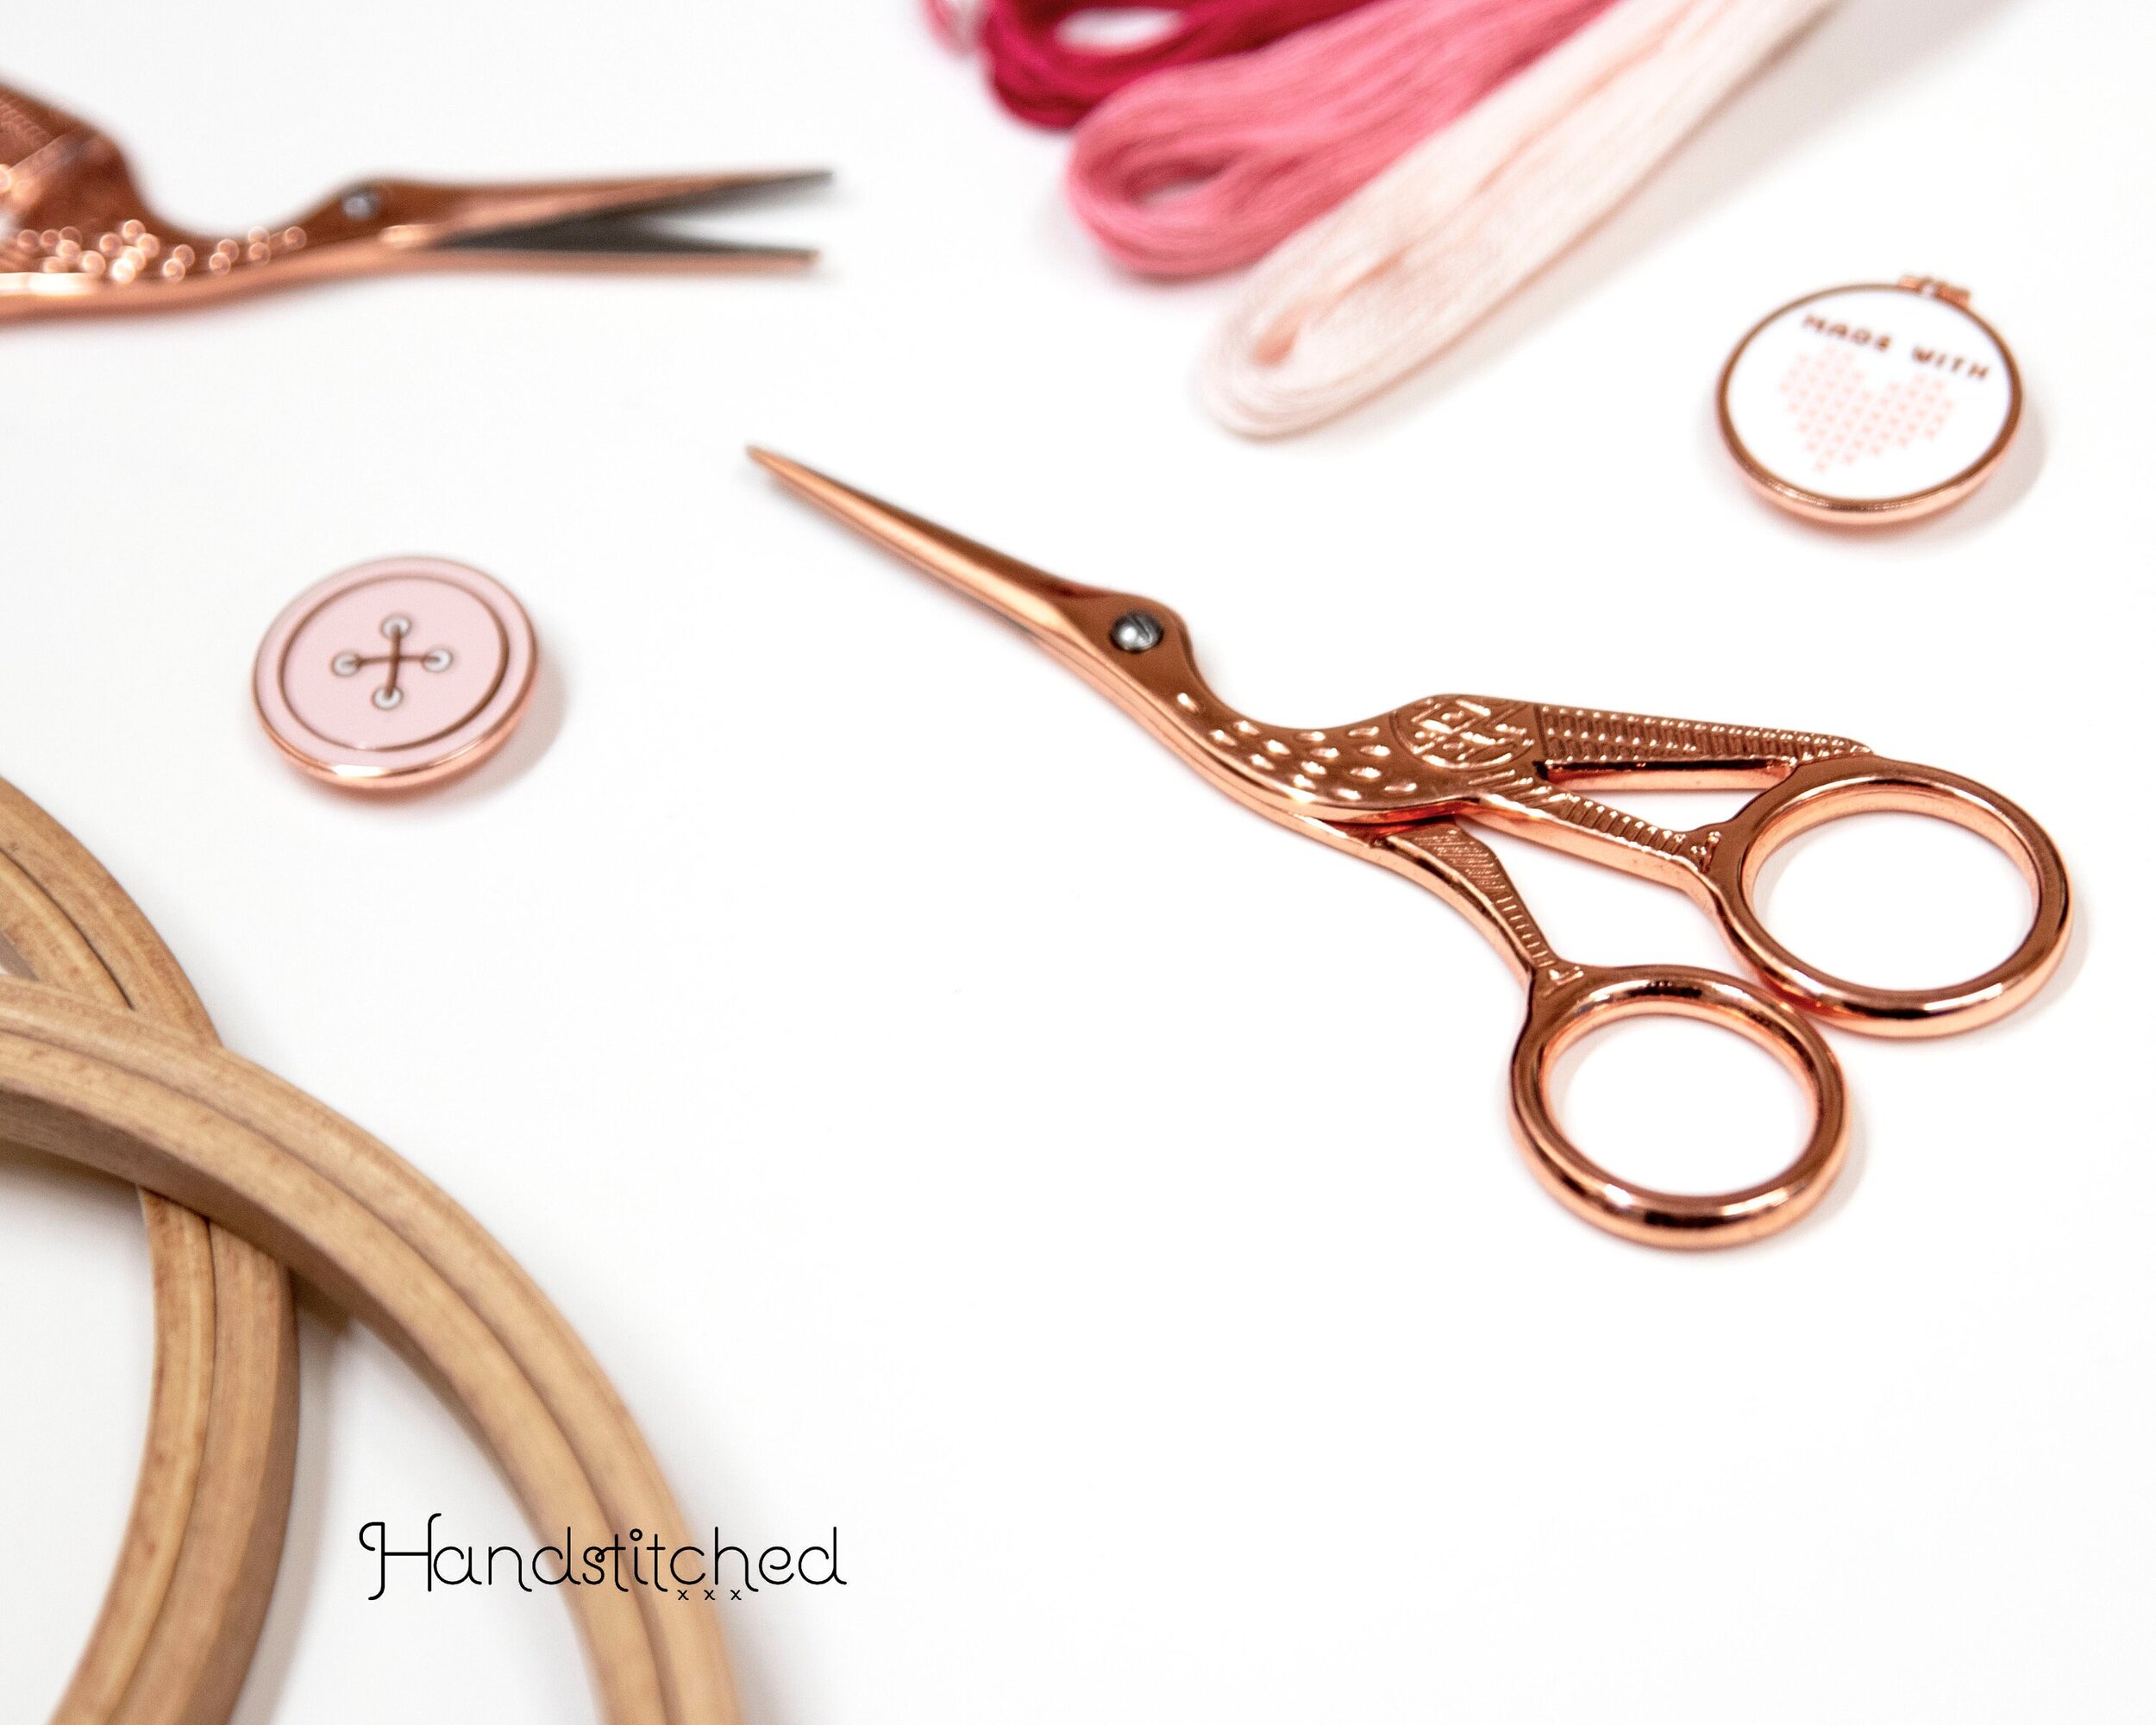 Rose Gold Stork Embroidery scissors - 4 inch rose gold bird heirloom  scissors for embroidery - stork sewing scissors - Stork Scissors —  Handstitched Studio